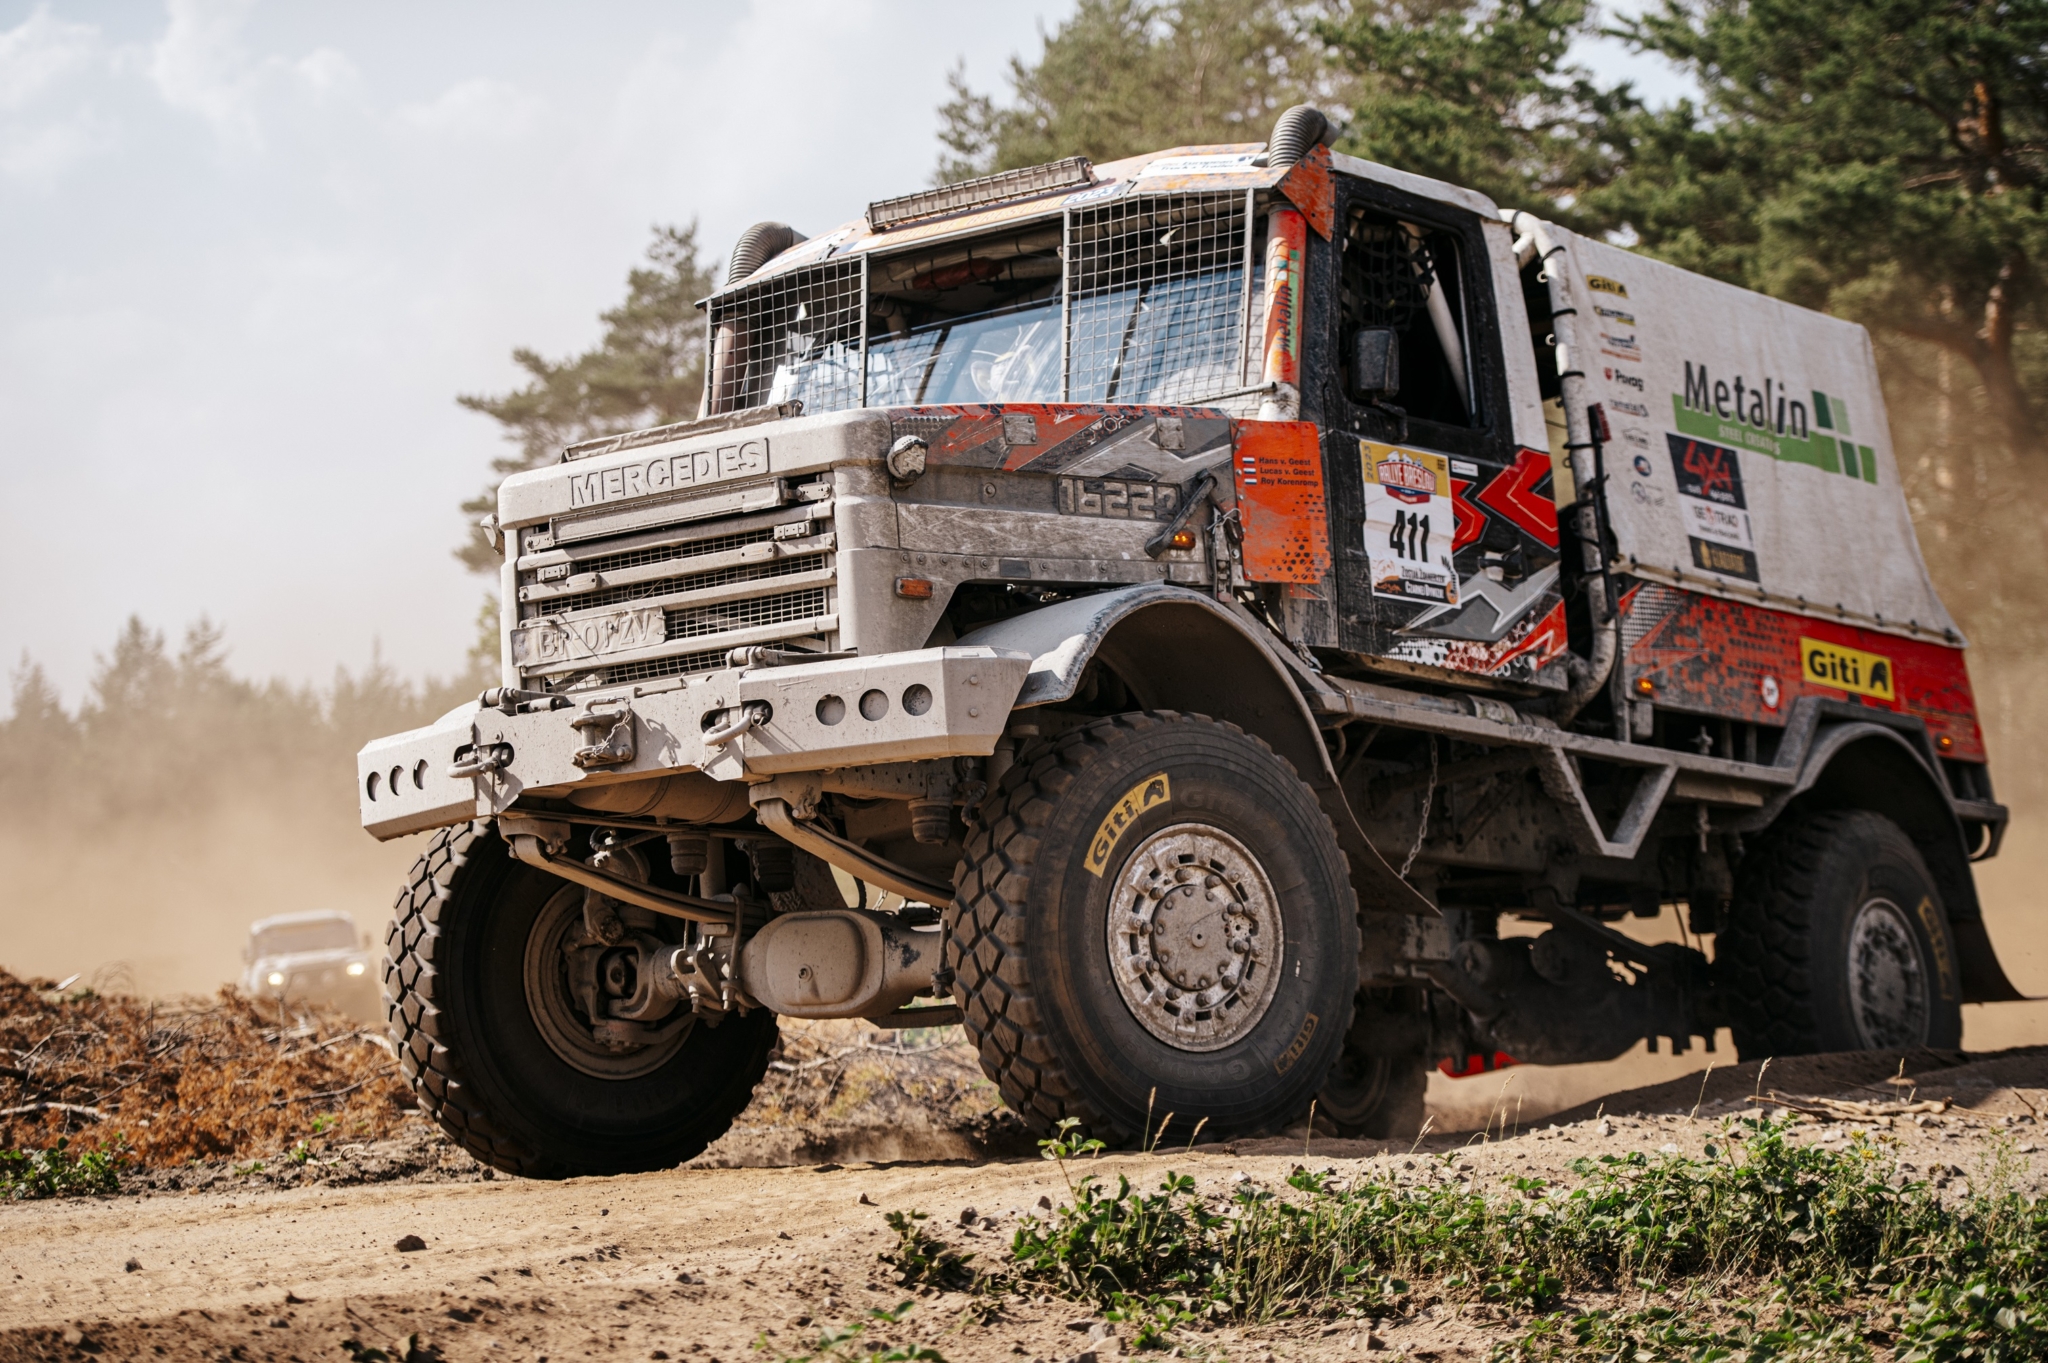 Giti-sponsored Truck Team Holten delivers four-by-four